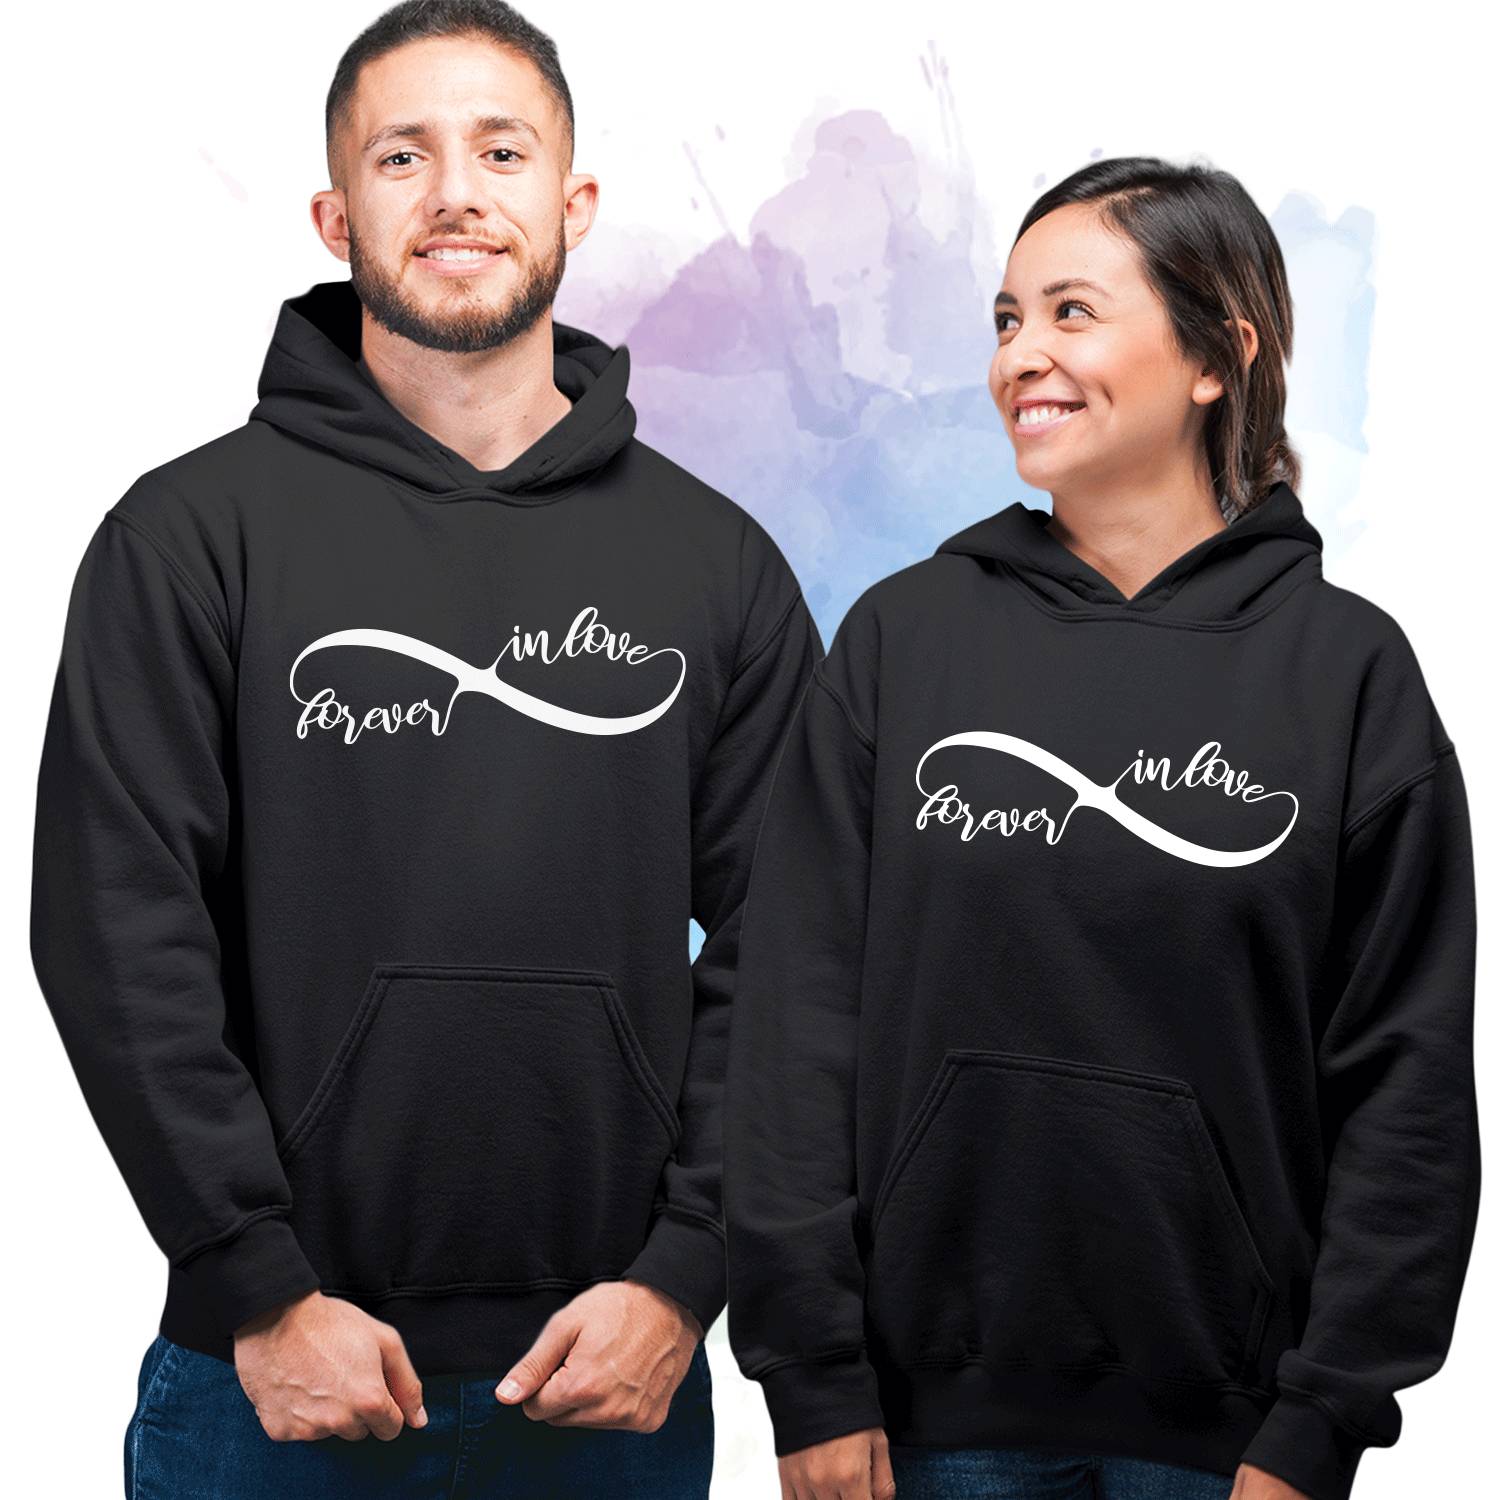 Couples Matching Hoodies  Matching hoodies for couples, Couples hoodies,  Matching couples sweatshirts